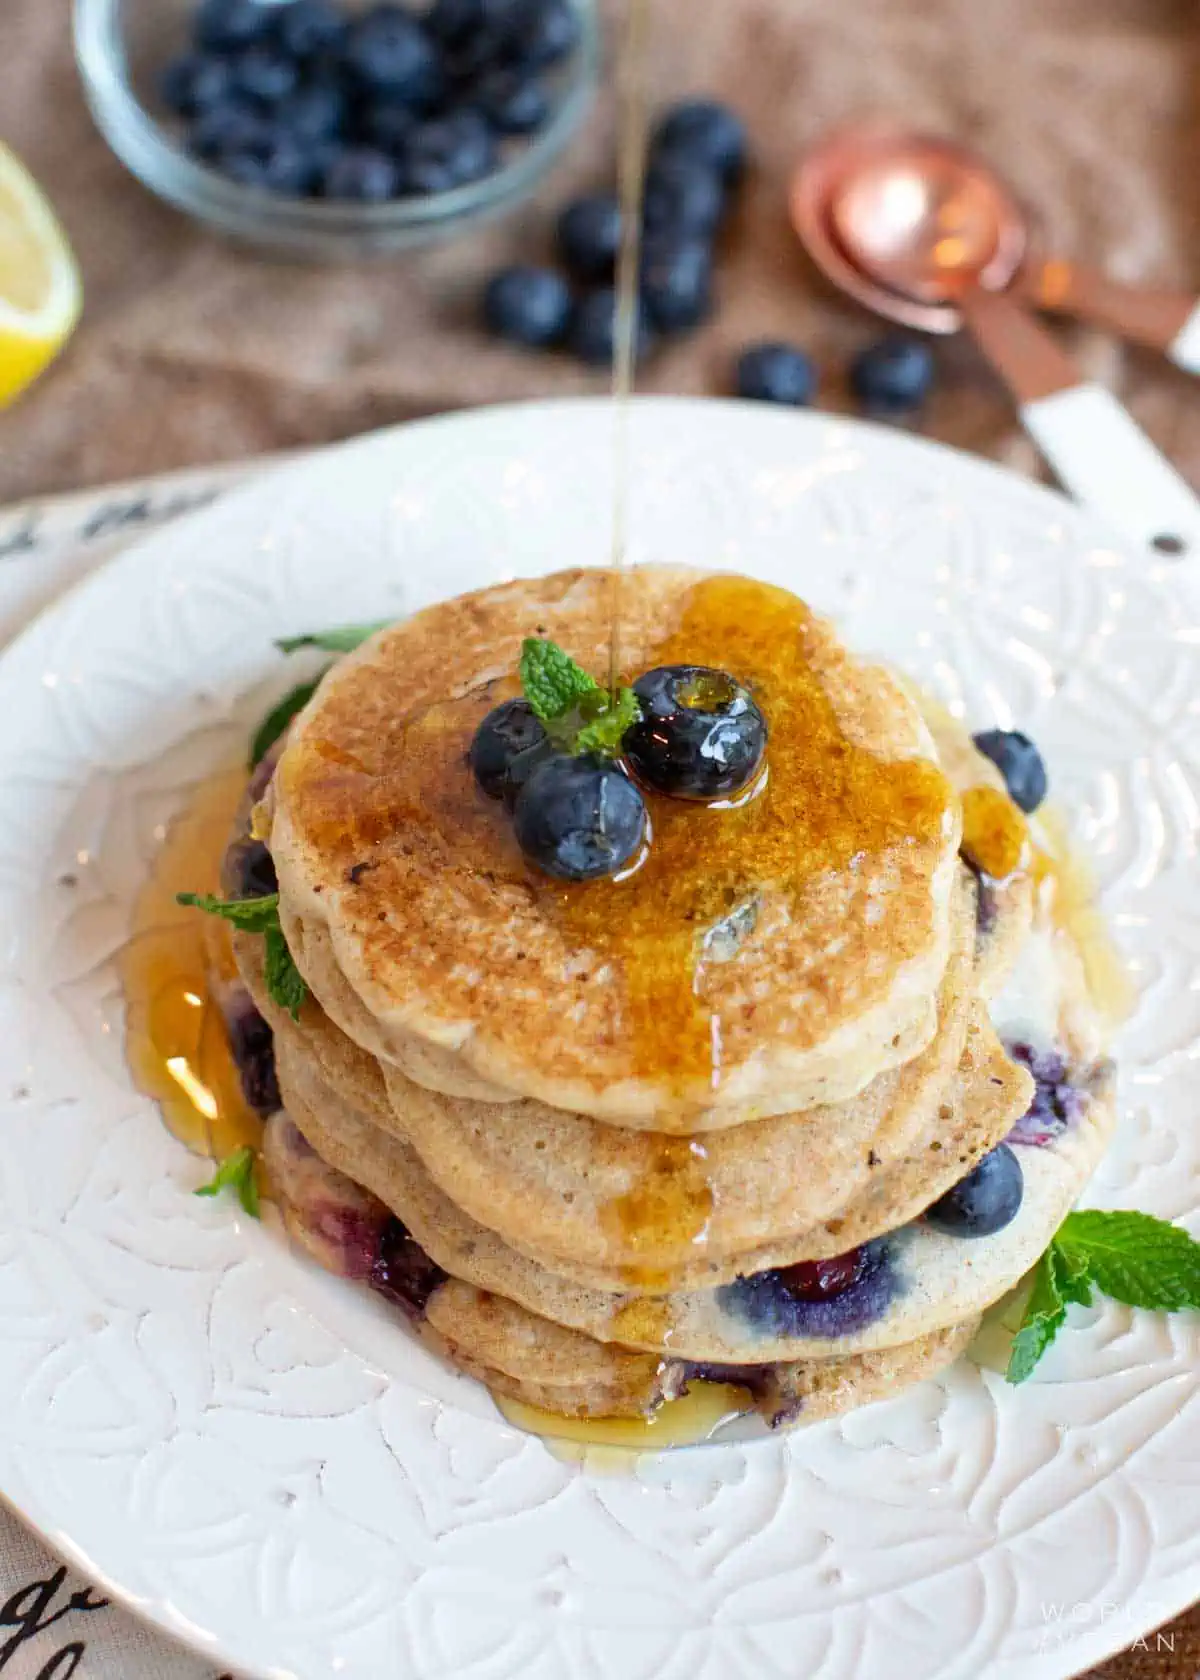 Overhead view of a stack of blueberry vegan pancakes, topped with more blueberries and maple syrup.